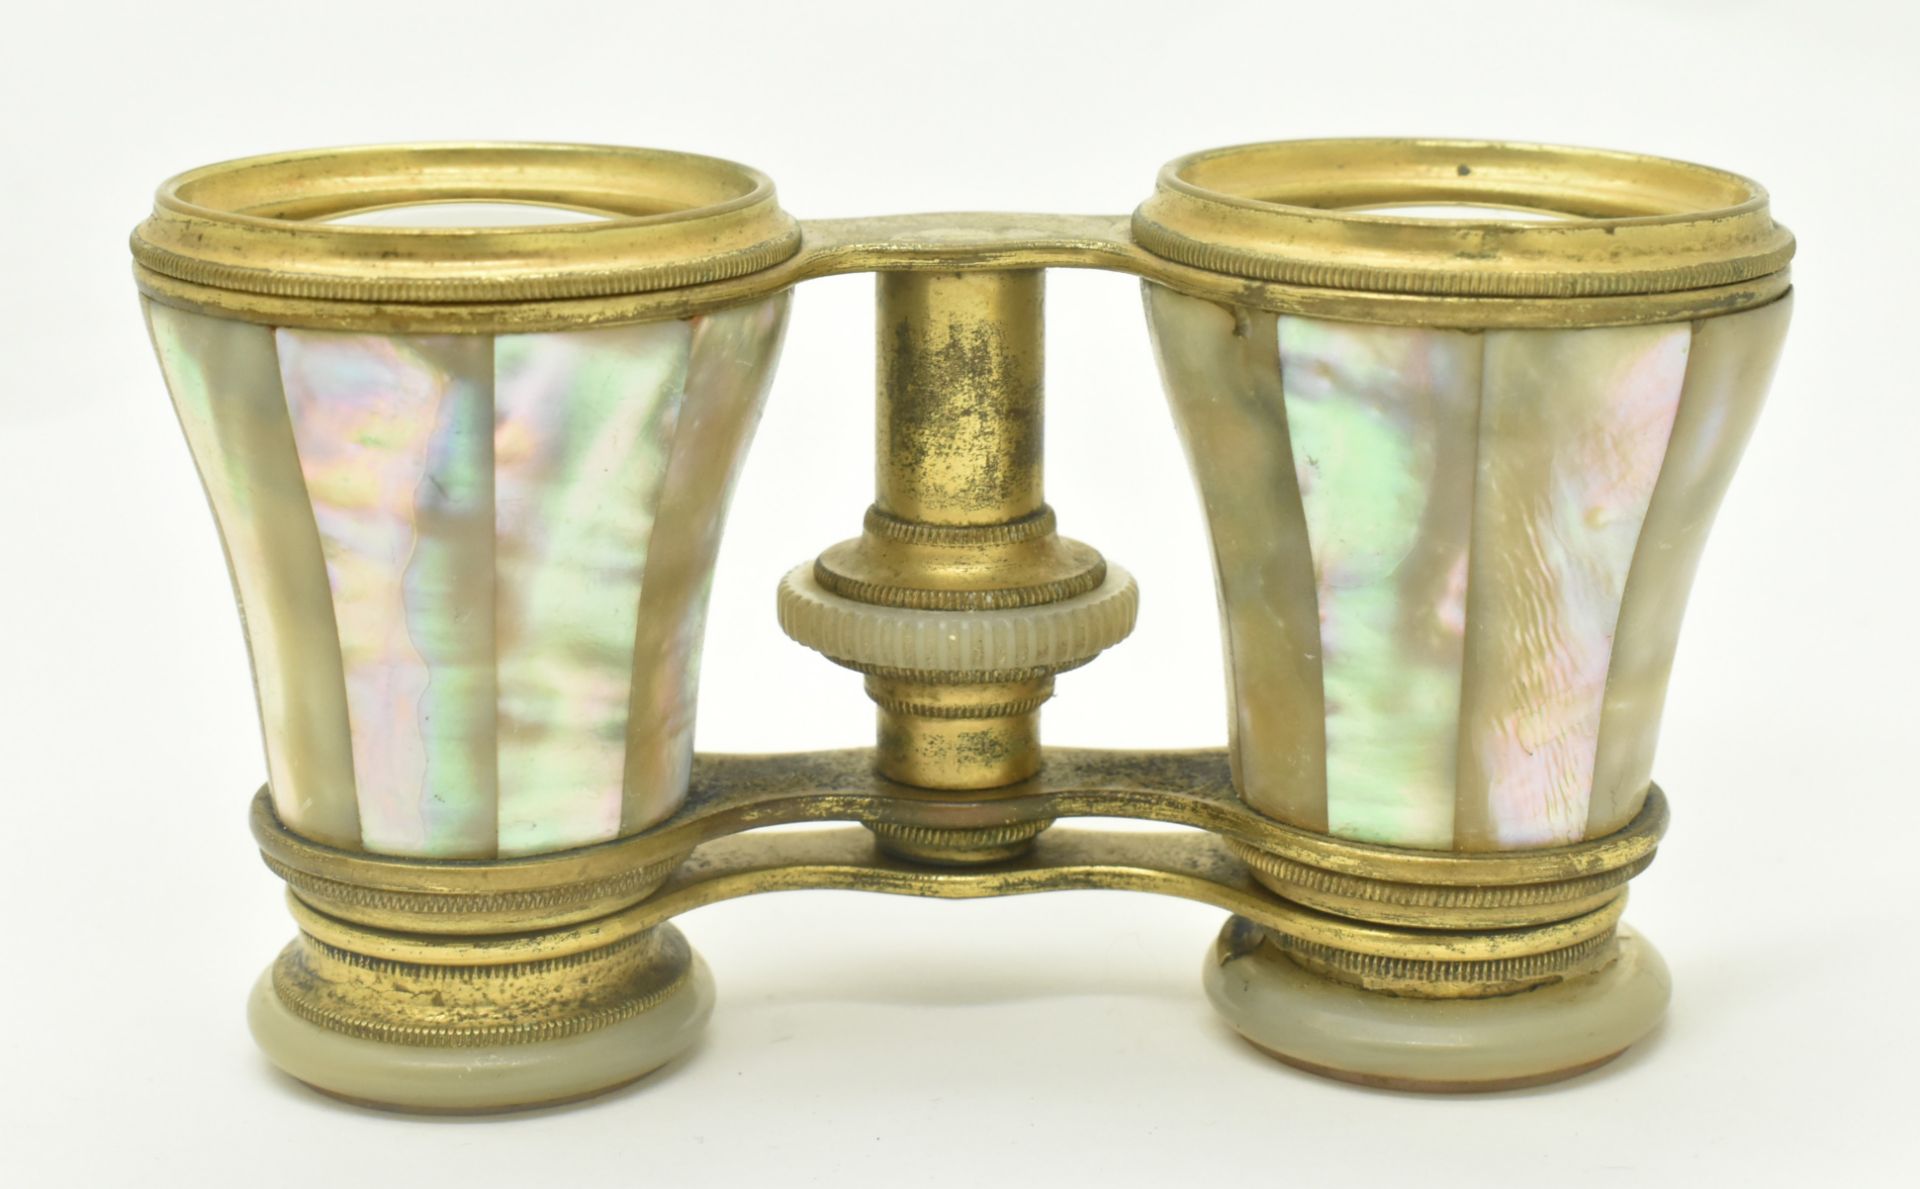 TWO PAIRS OF FRENCH MOTHER OF PEARL OPERA GLASSES - Image 6 of 7